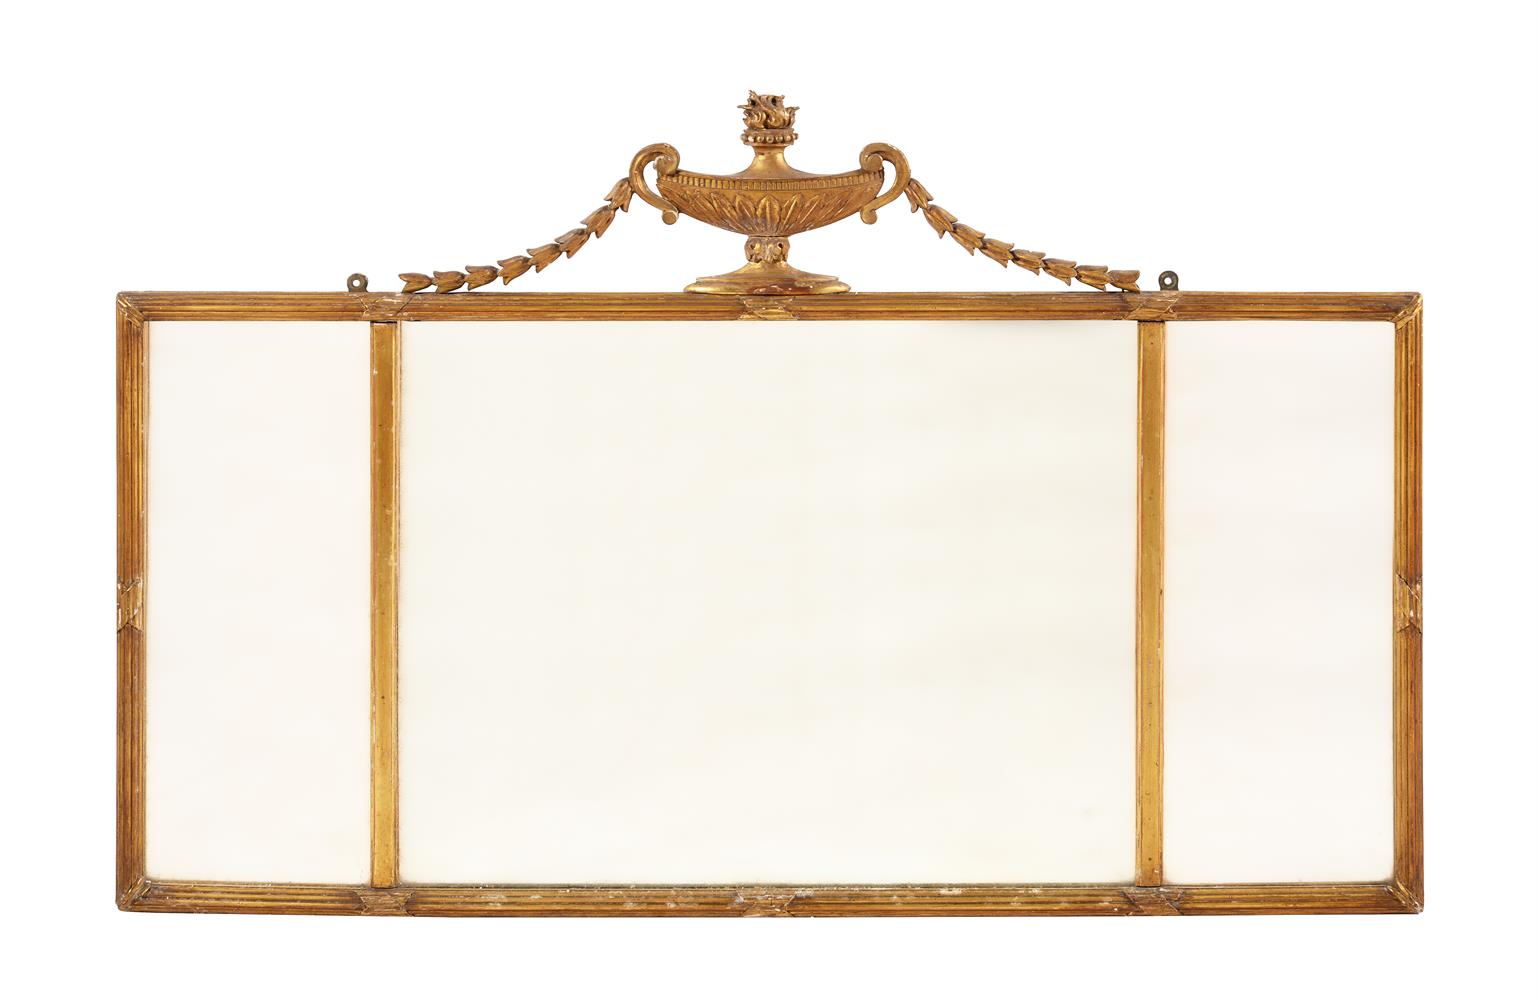 A TRIPTYCH GILTWOOD OVERMANTEL MIRROR